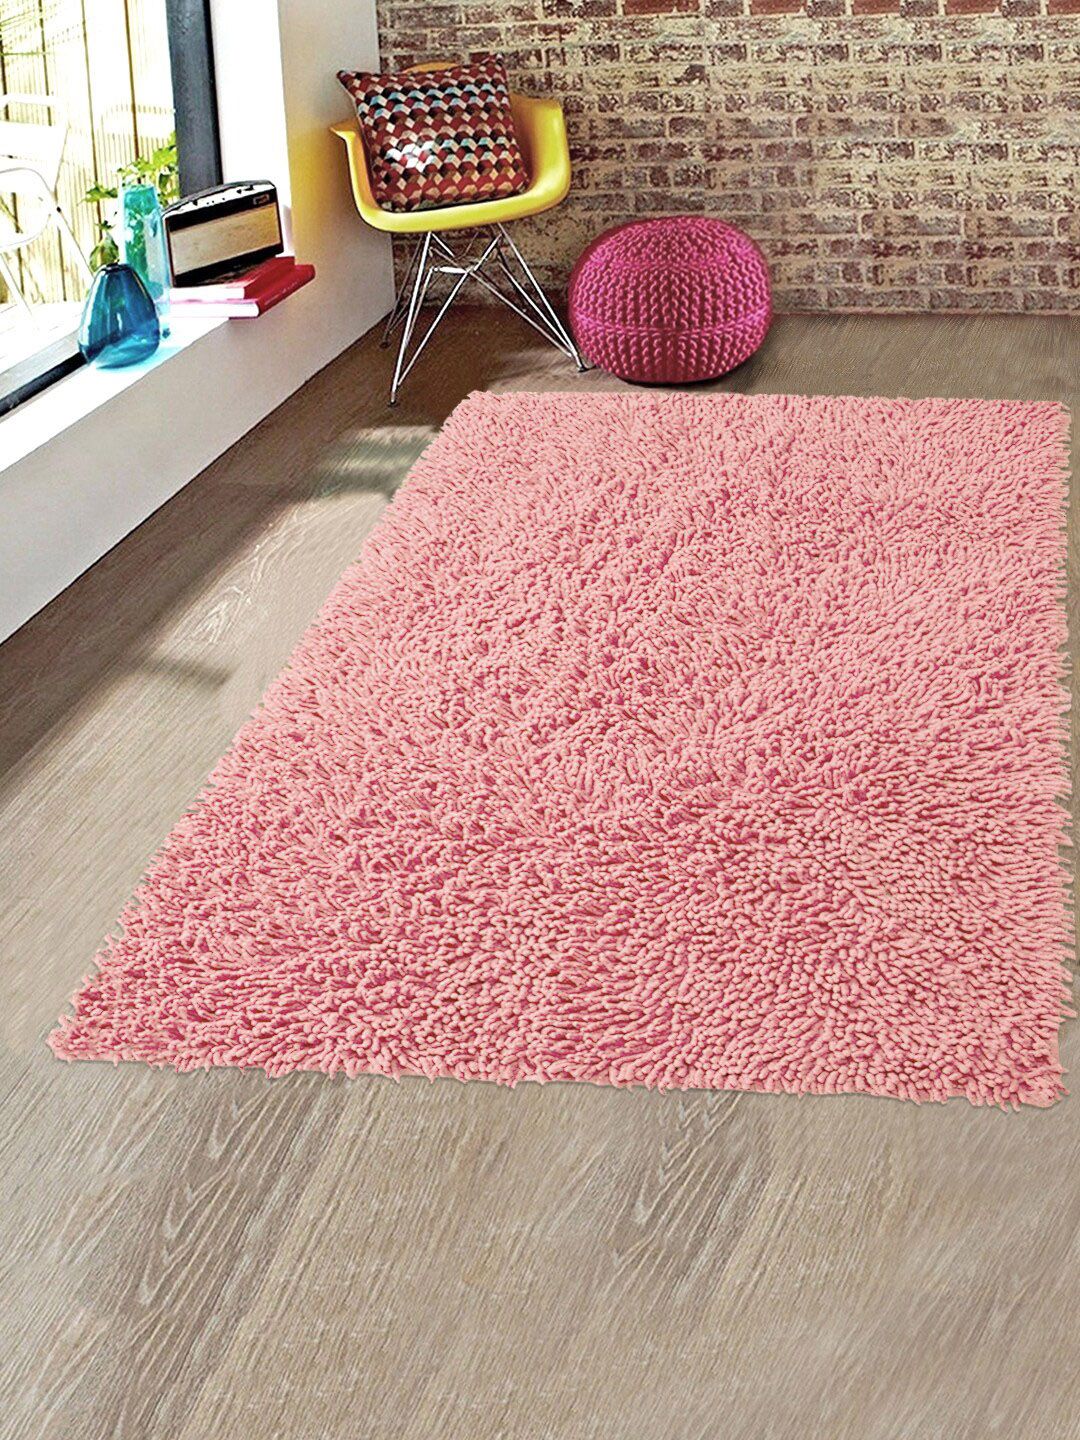 Saral Home Pink Solid Shaggy Anti-Skid Carpets Price in India